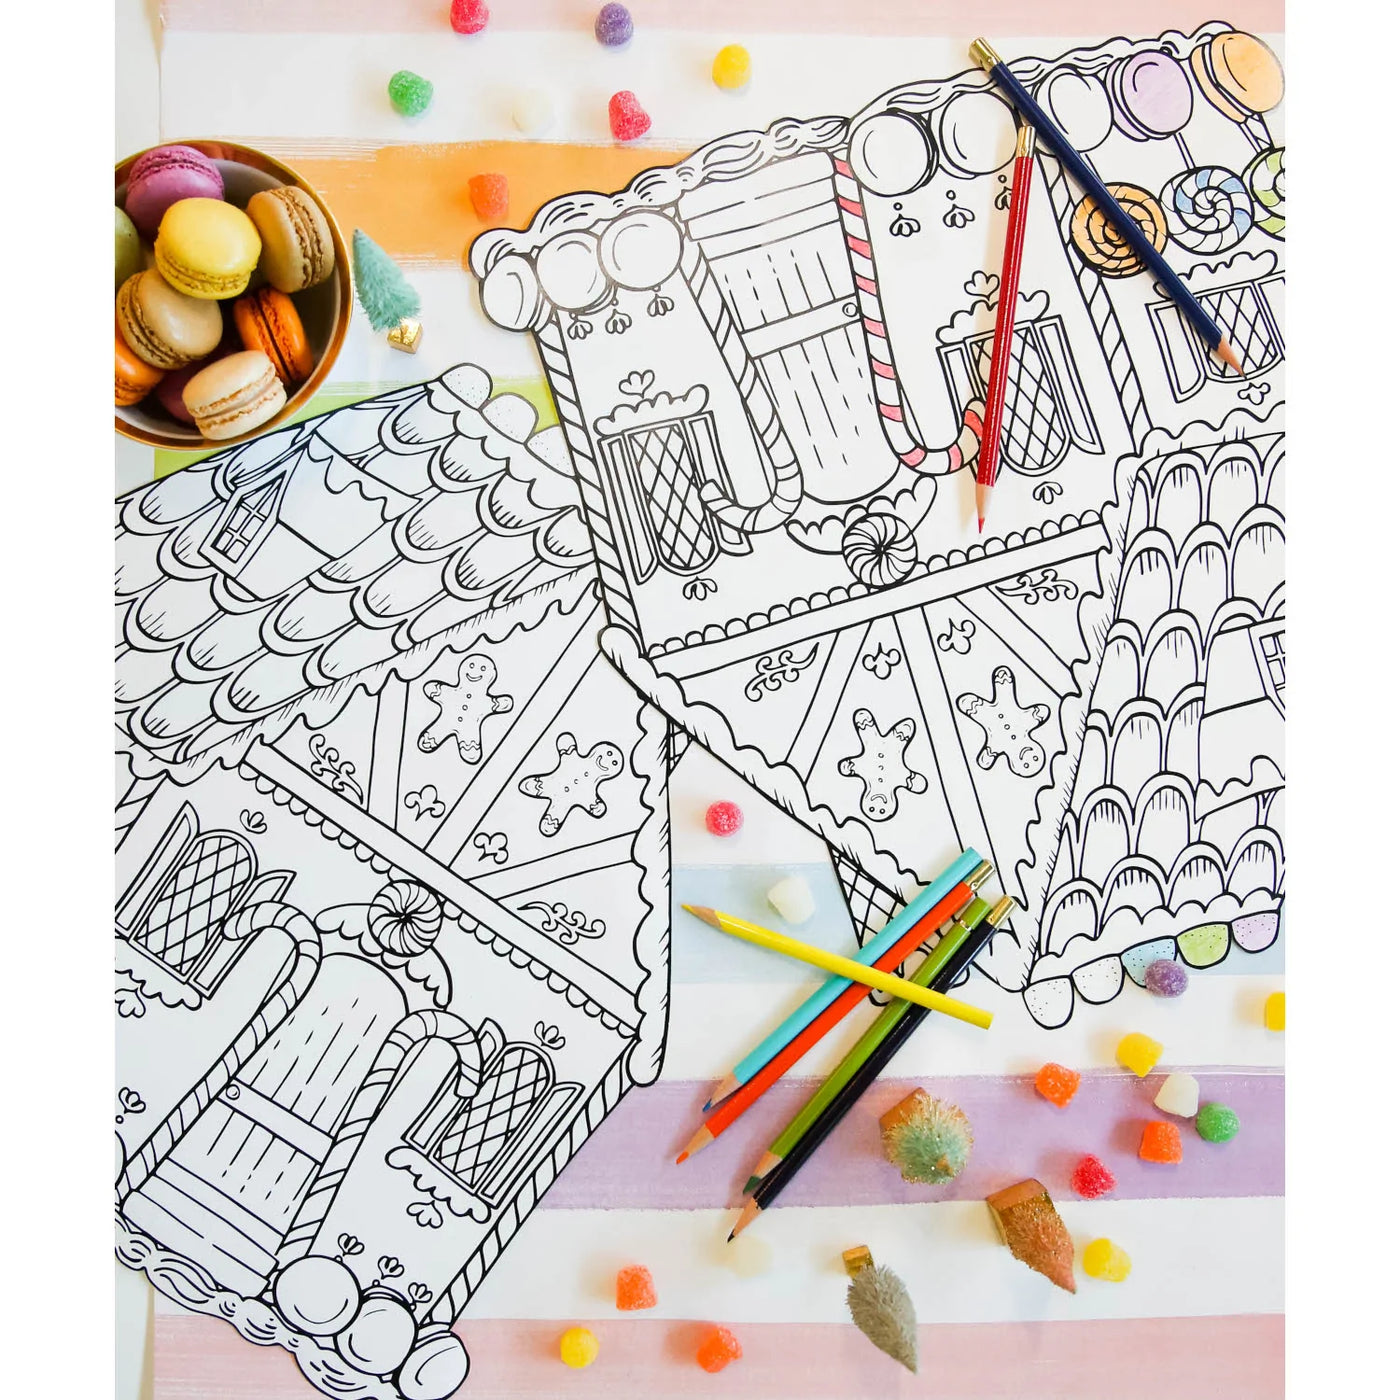 Die-Cut Gingerbread House Coloring Placemat